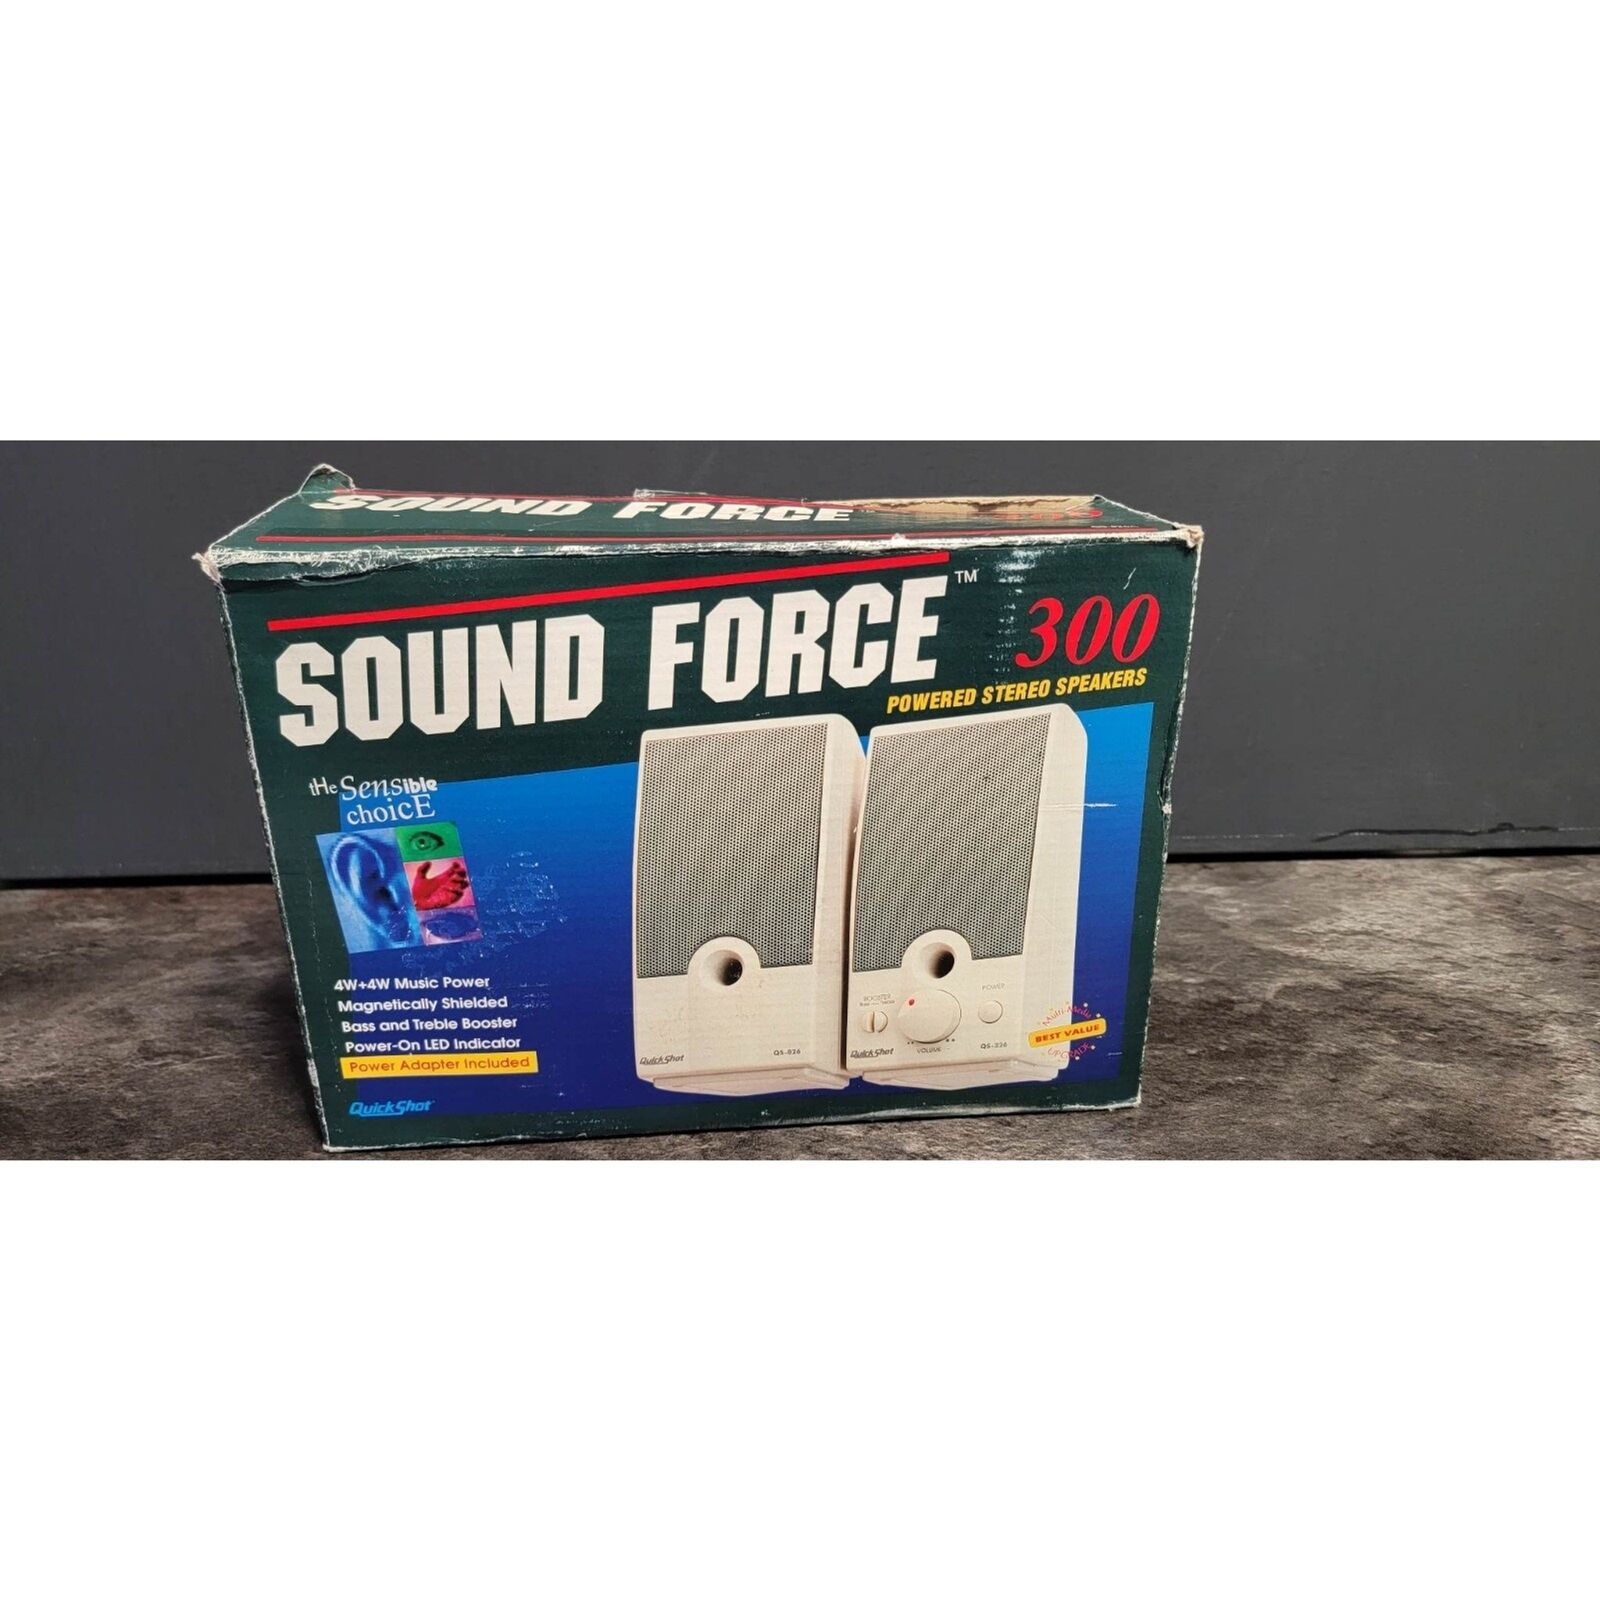 Sound Force 300 Powered Stereo Speakers 4W+4W Music Power Magenitcally Shielded 